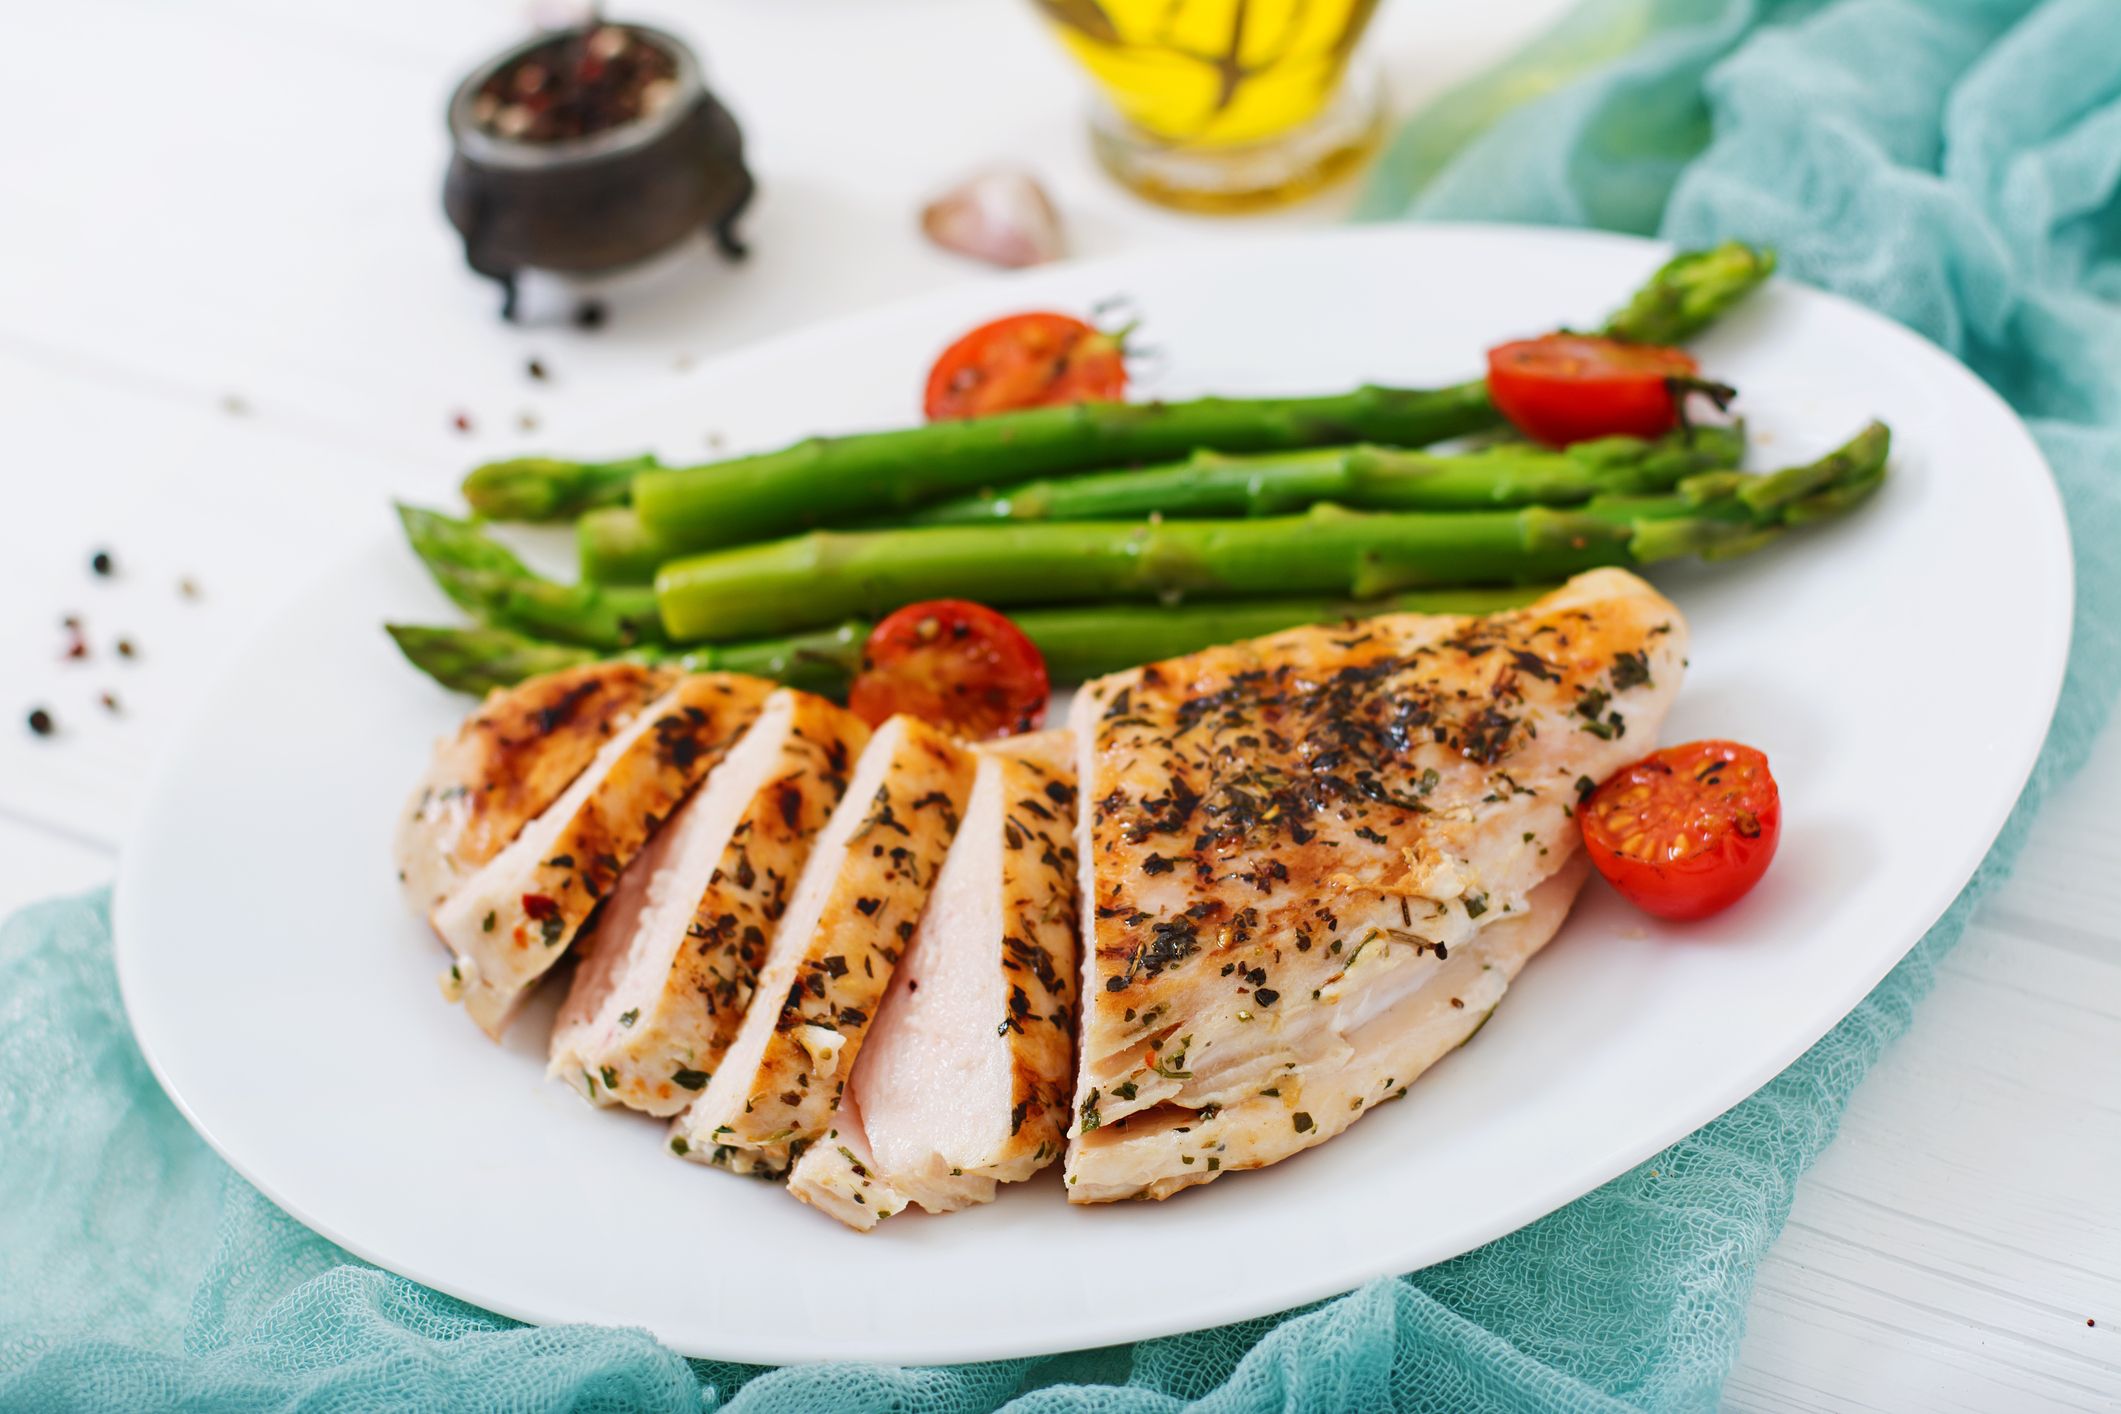 The nutritional value and health benefits of chicken breast